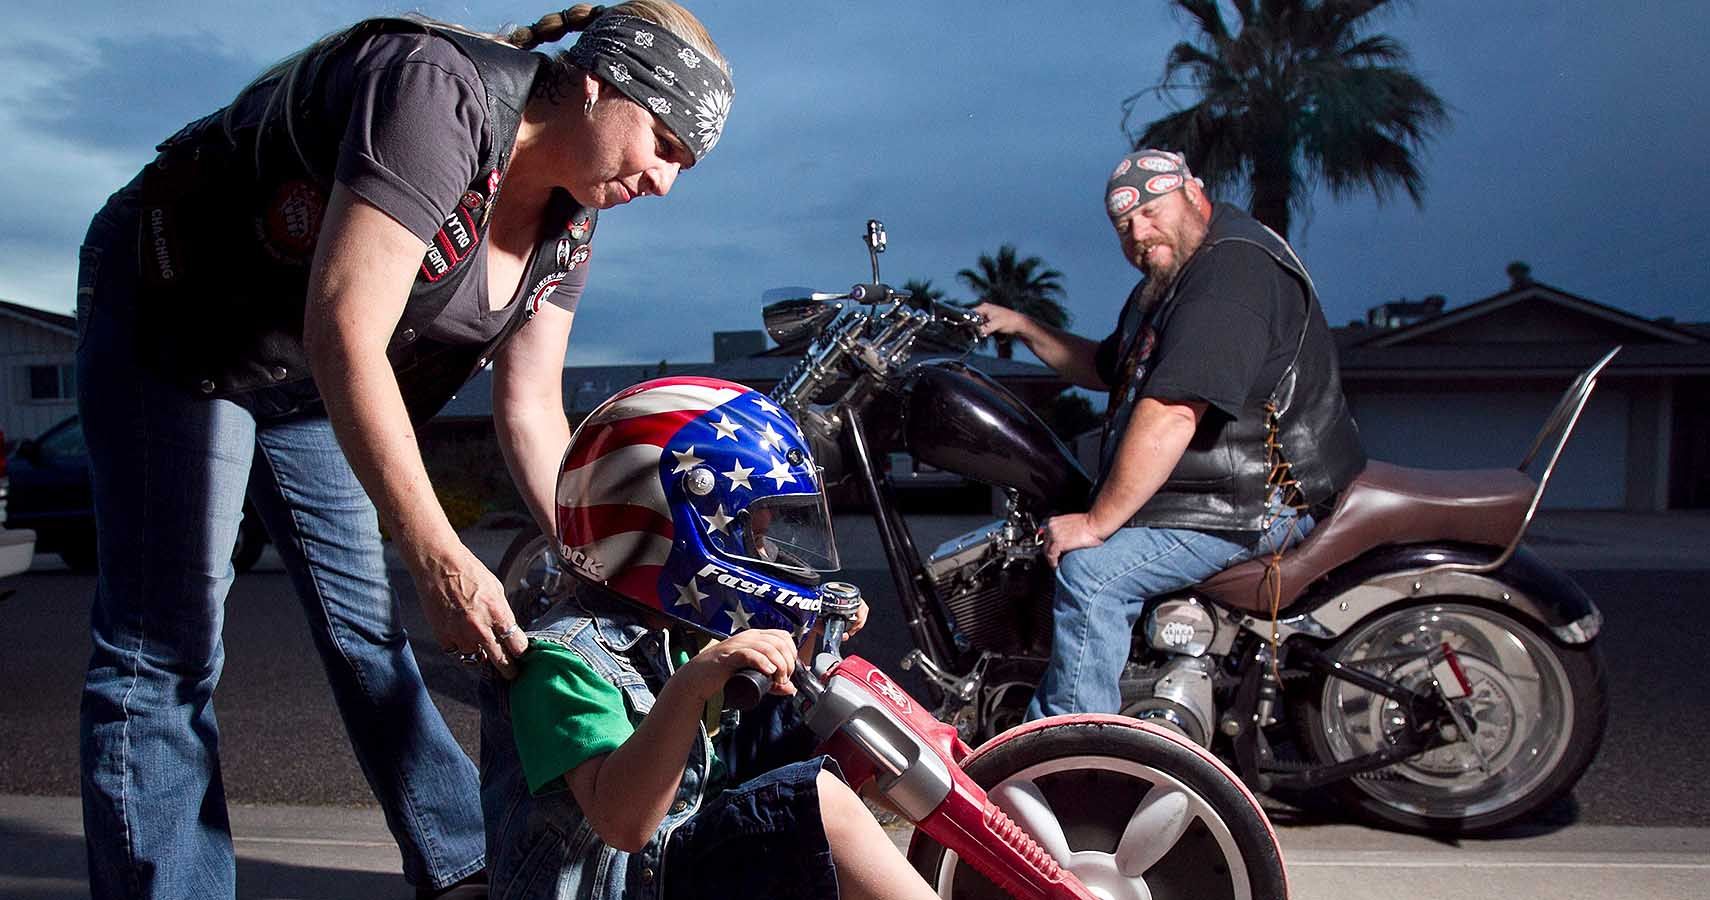 The Non-Members Are Kept Away From Motorcycle Club's Business